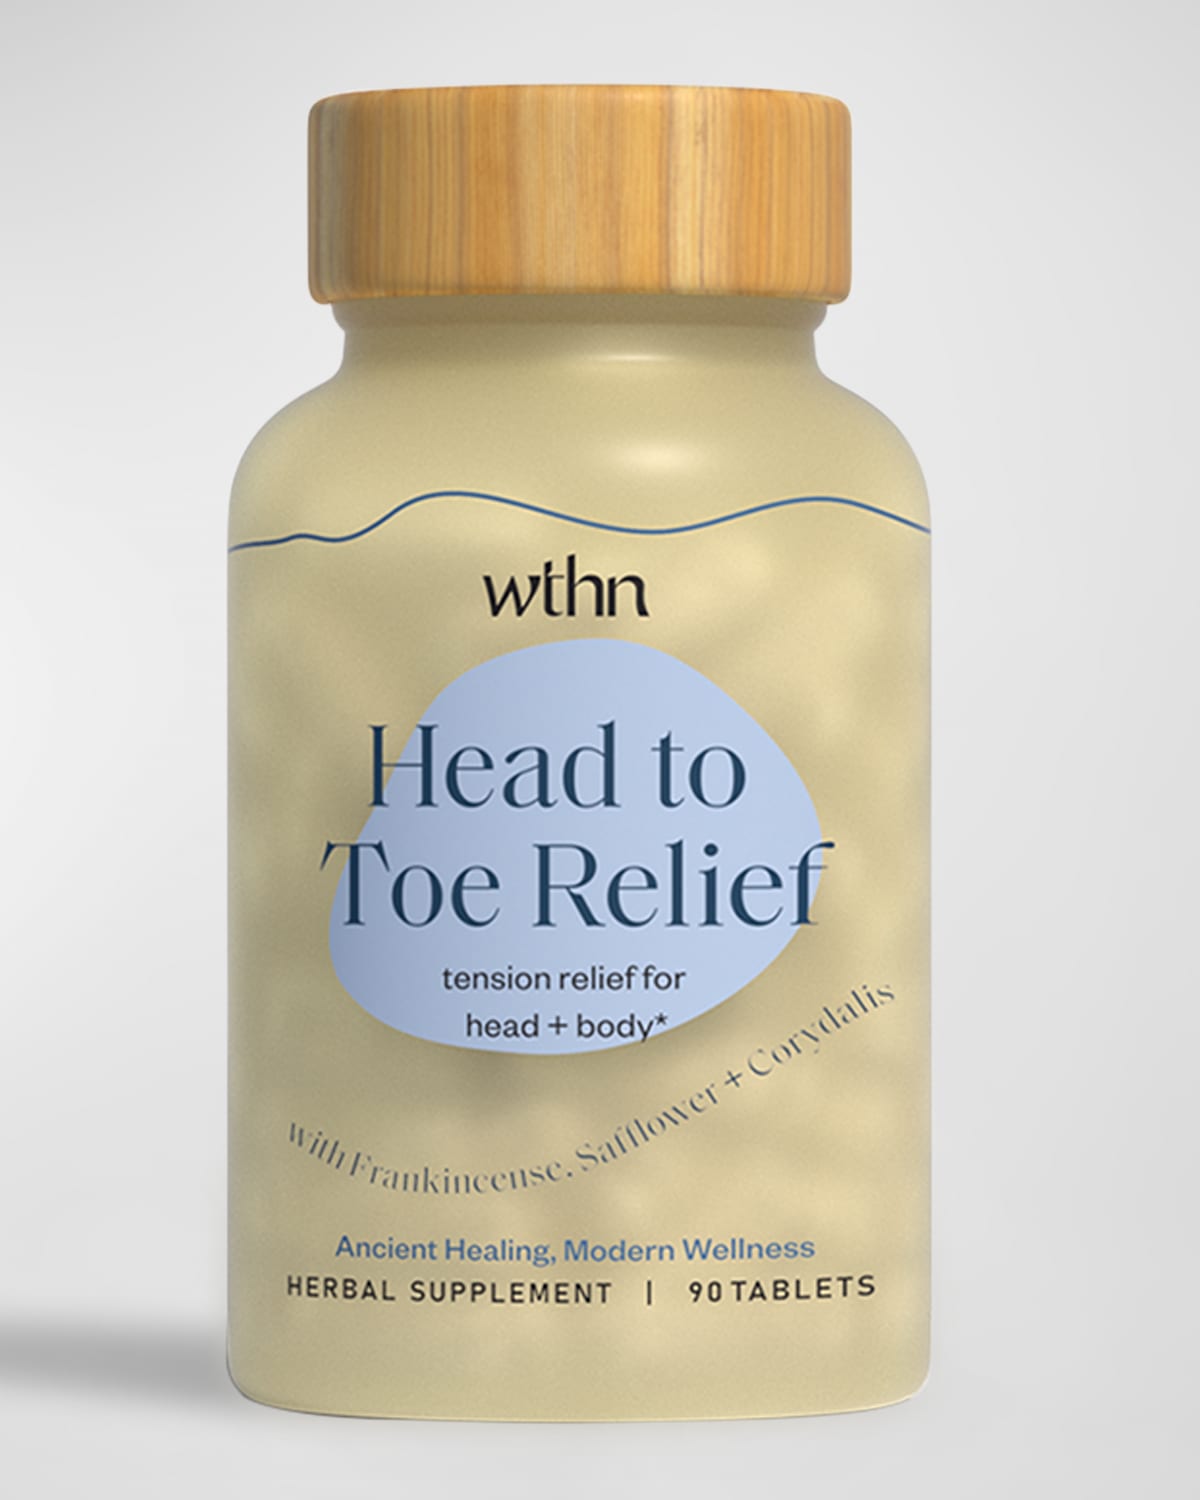 Head to Toe Relief Supplement - 90 Tablets